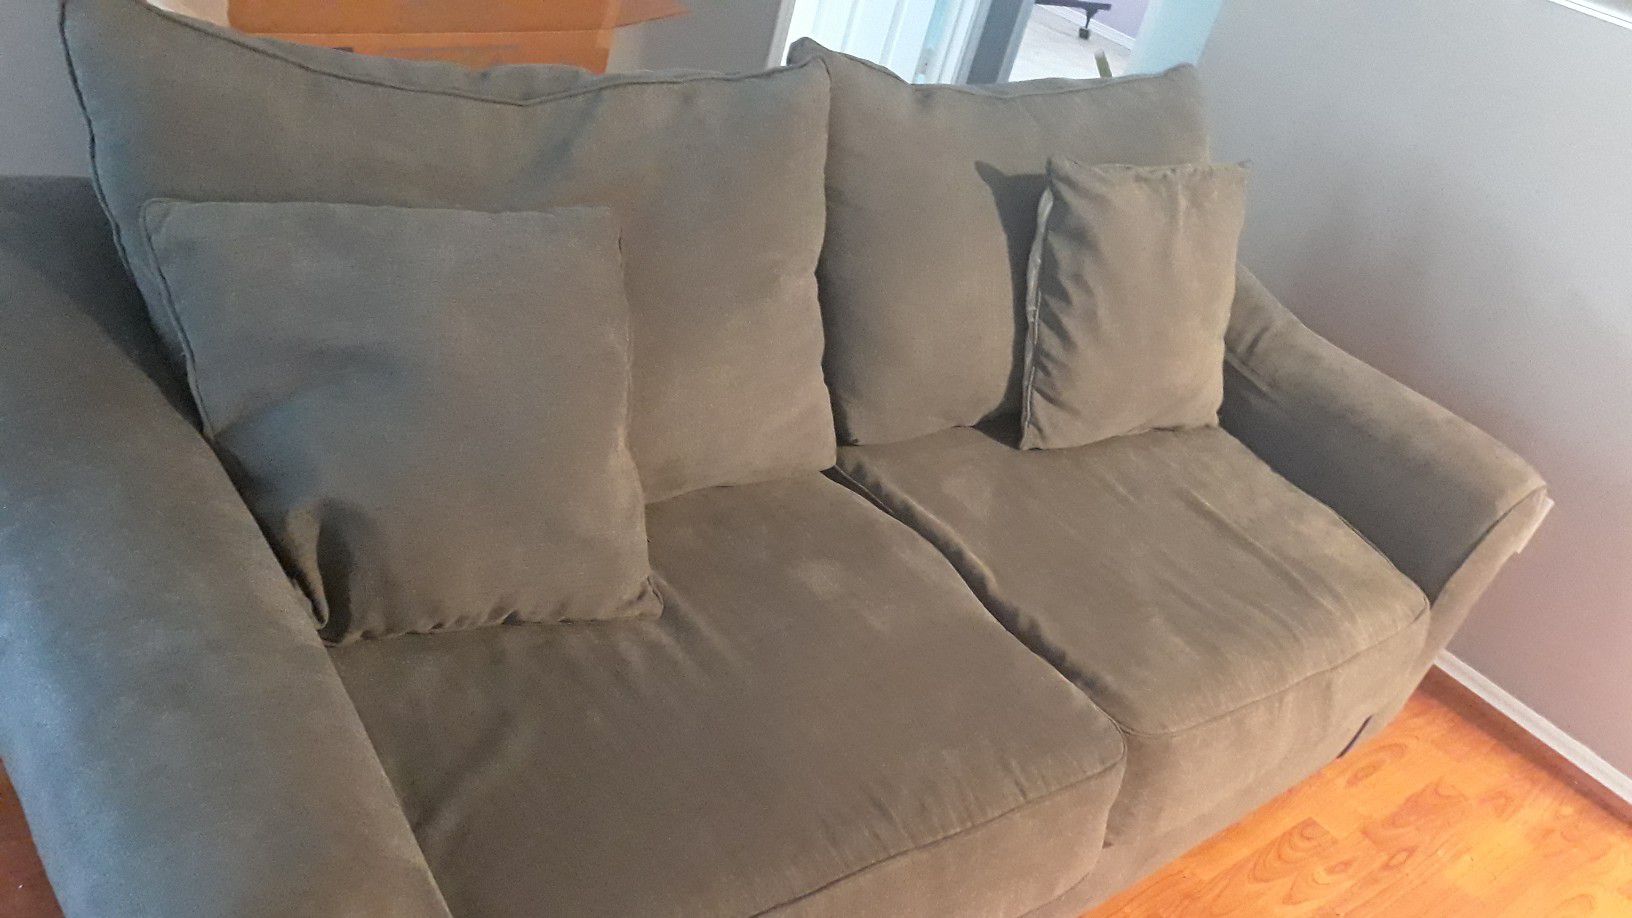 Free sleeper couch. MUST PICK UP THIS MORNING